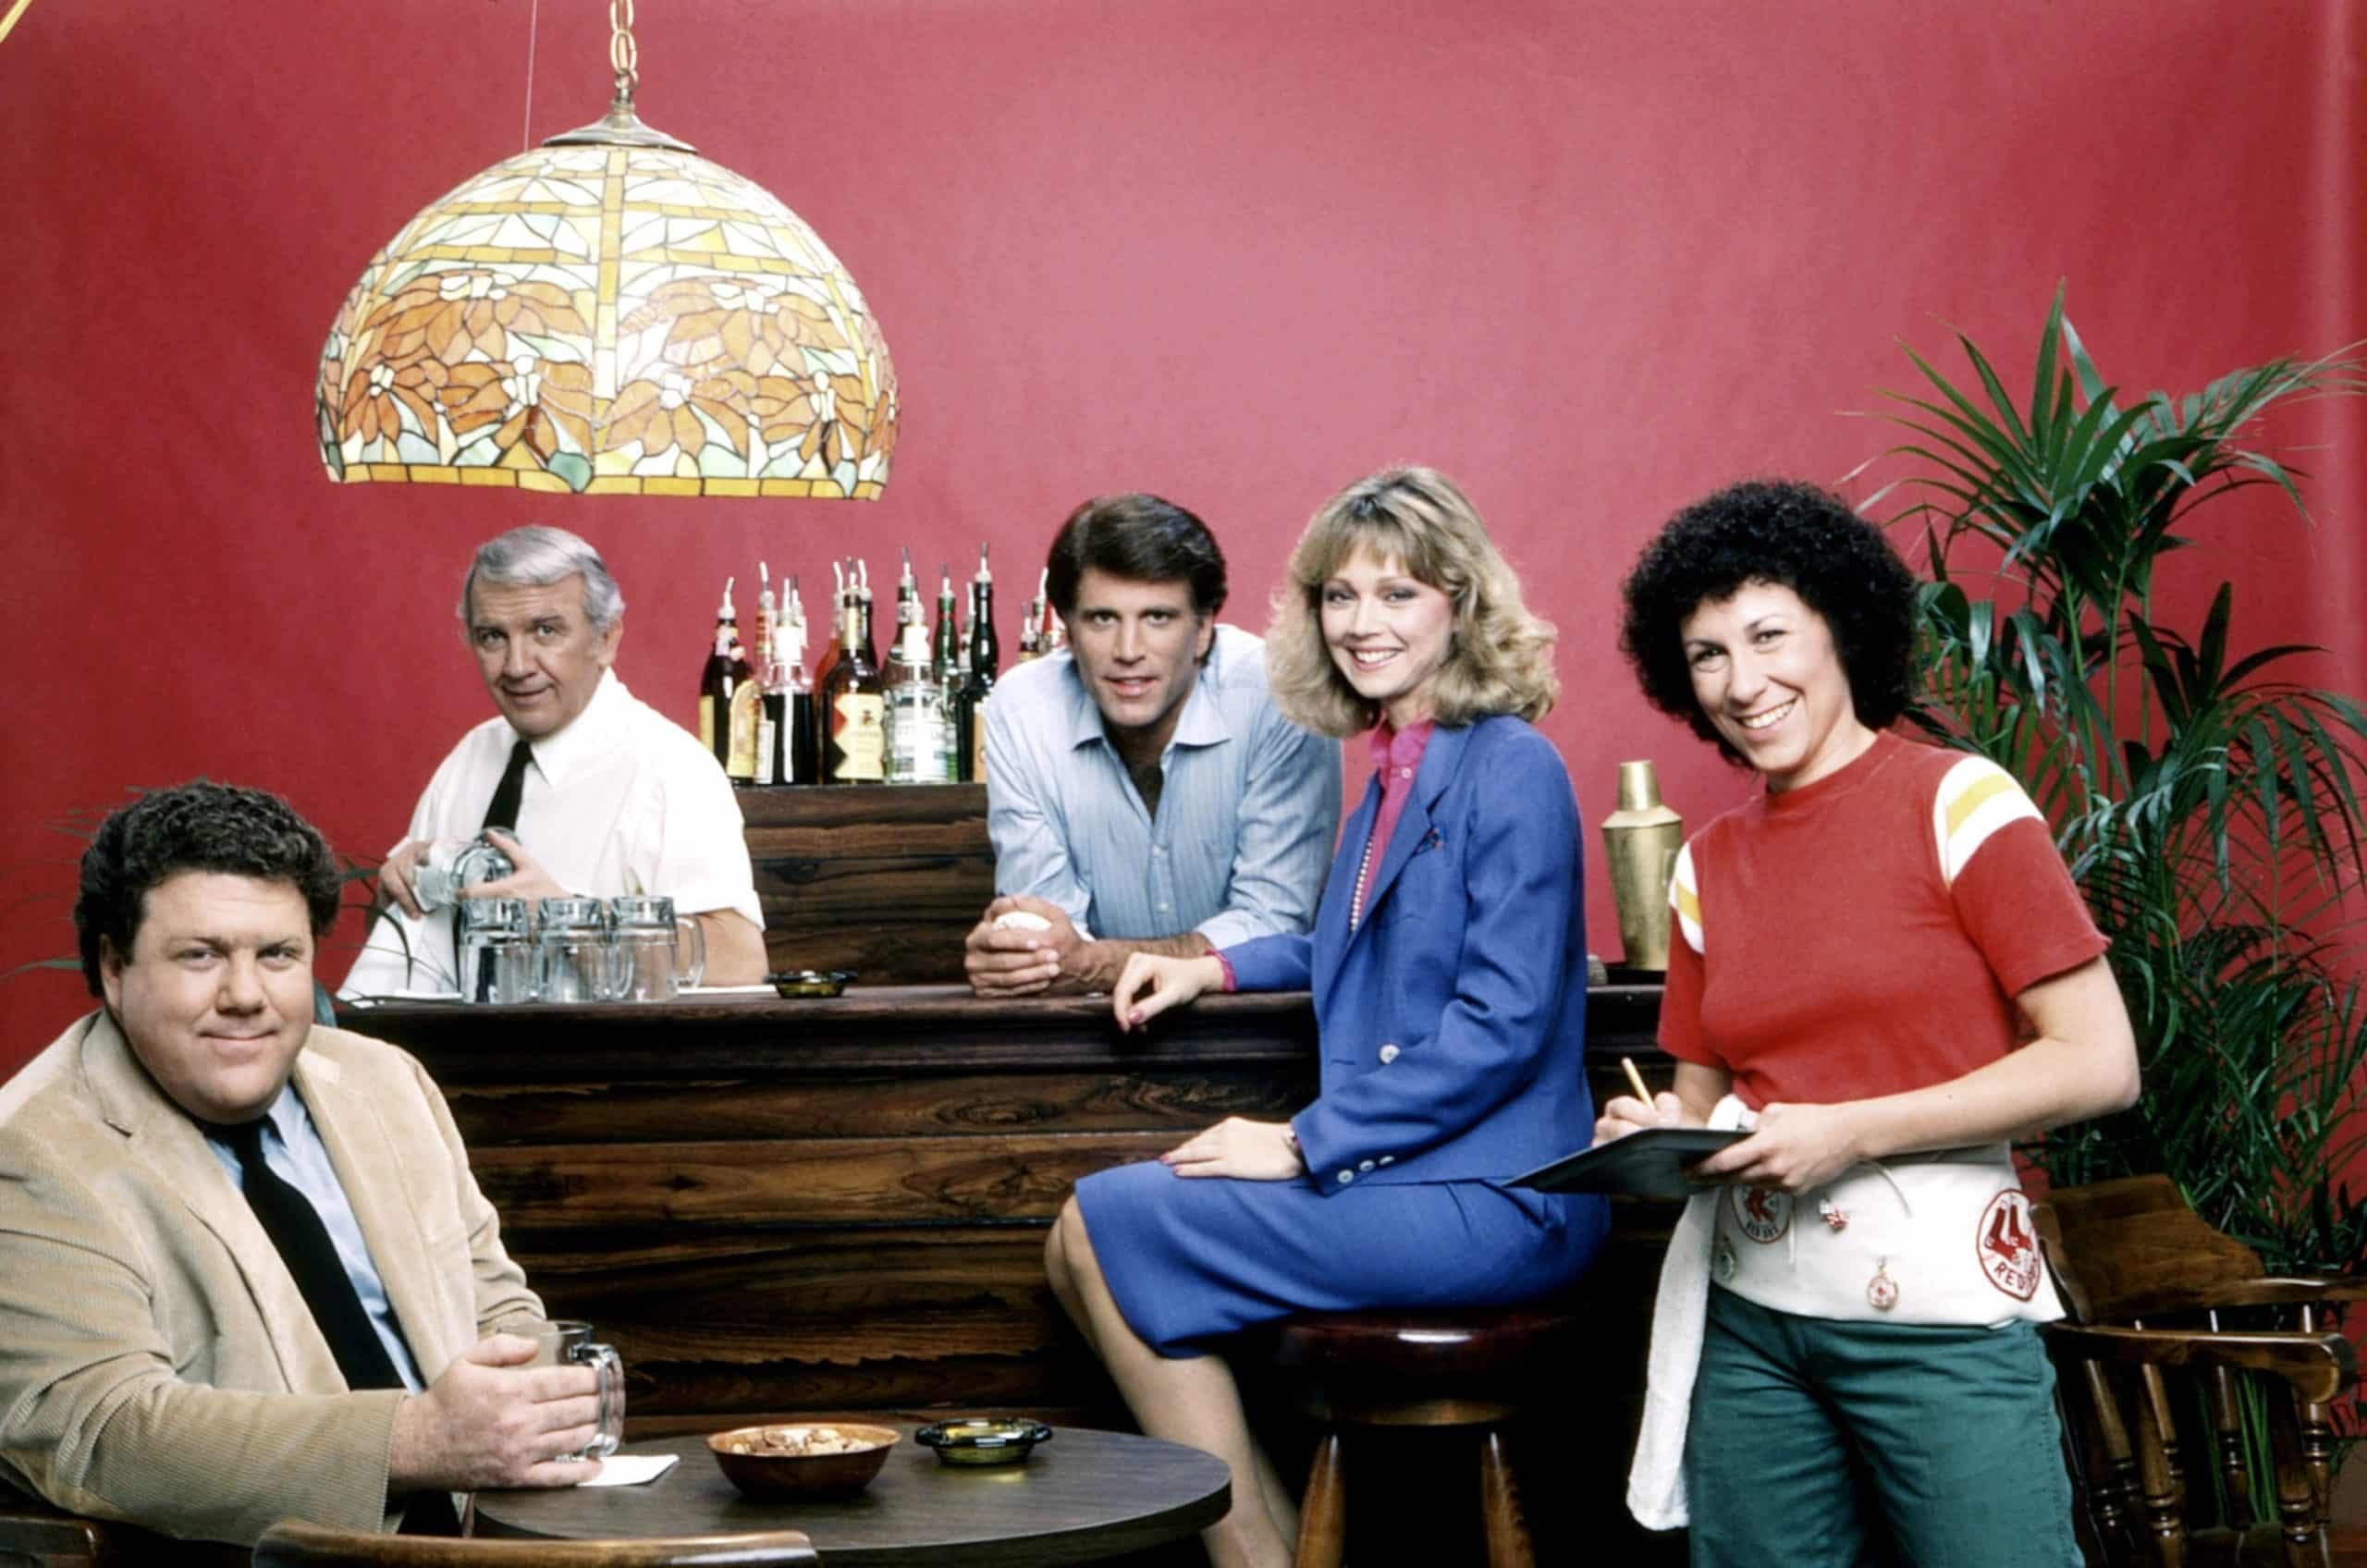 CHEERS, from left, George Wendt, Nicholas Colasanto, Ted Danson, Shelley Long, Rhea Perlman